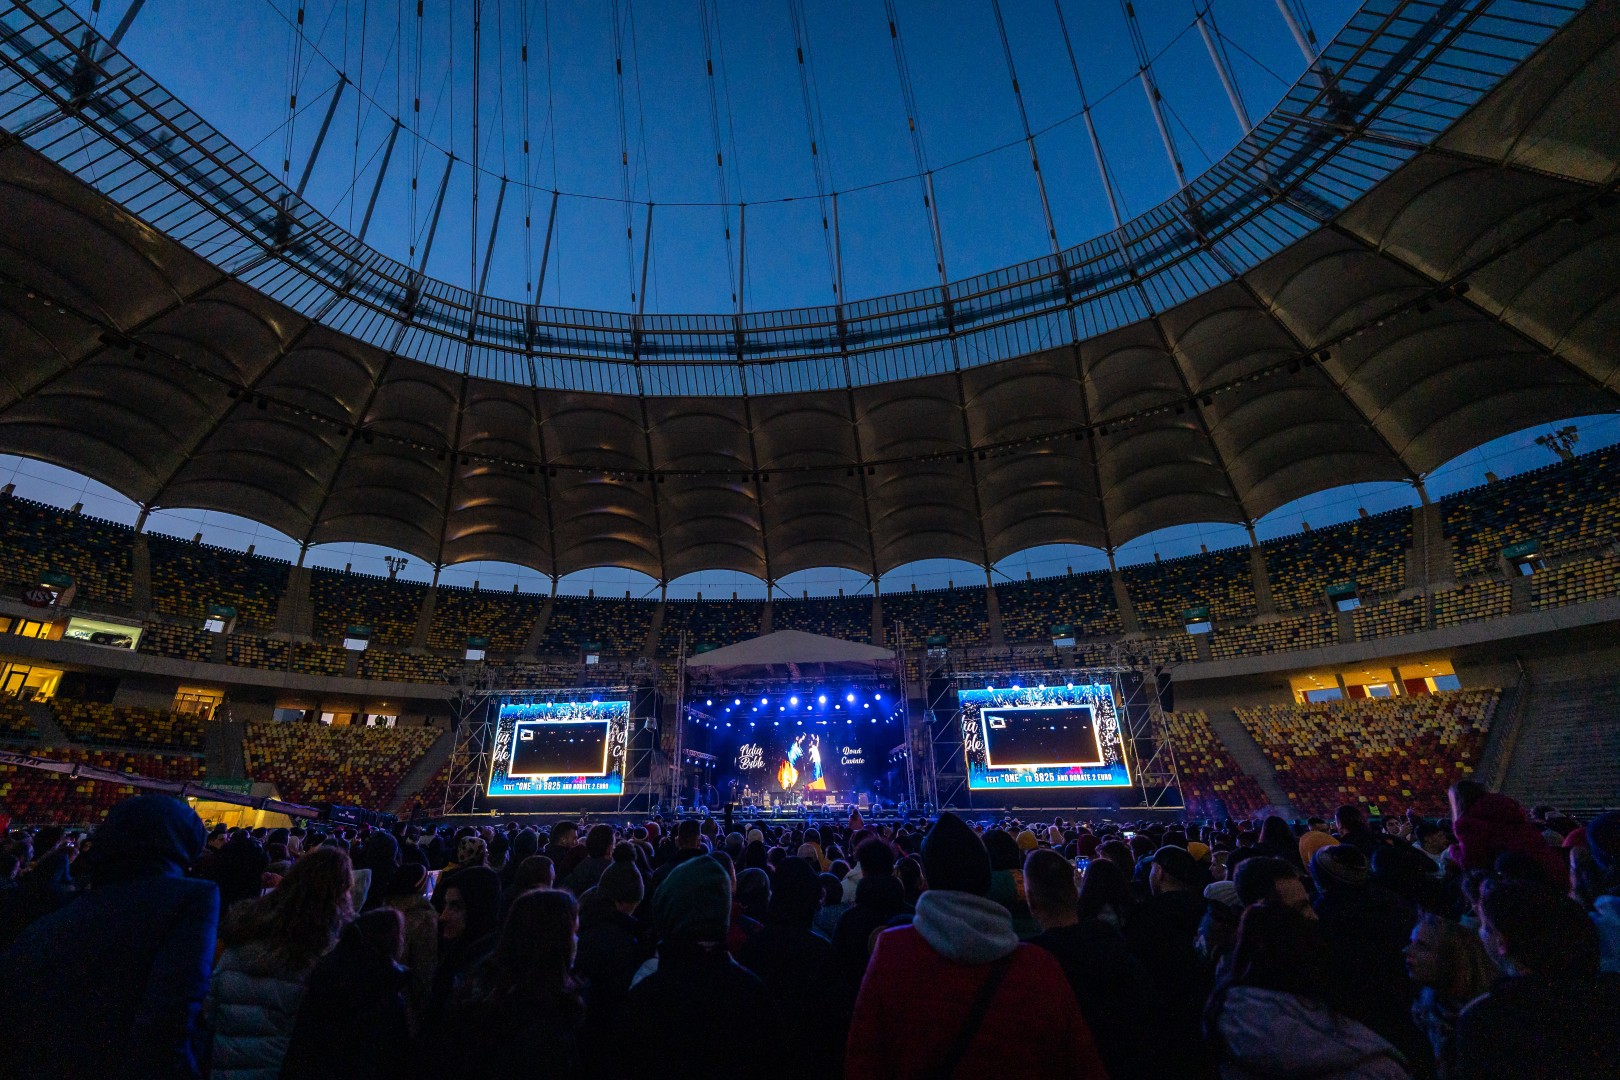 Lidia Buble at National Arena in Bucharest on March 12, 2022 (93bb955904)